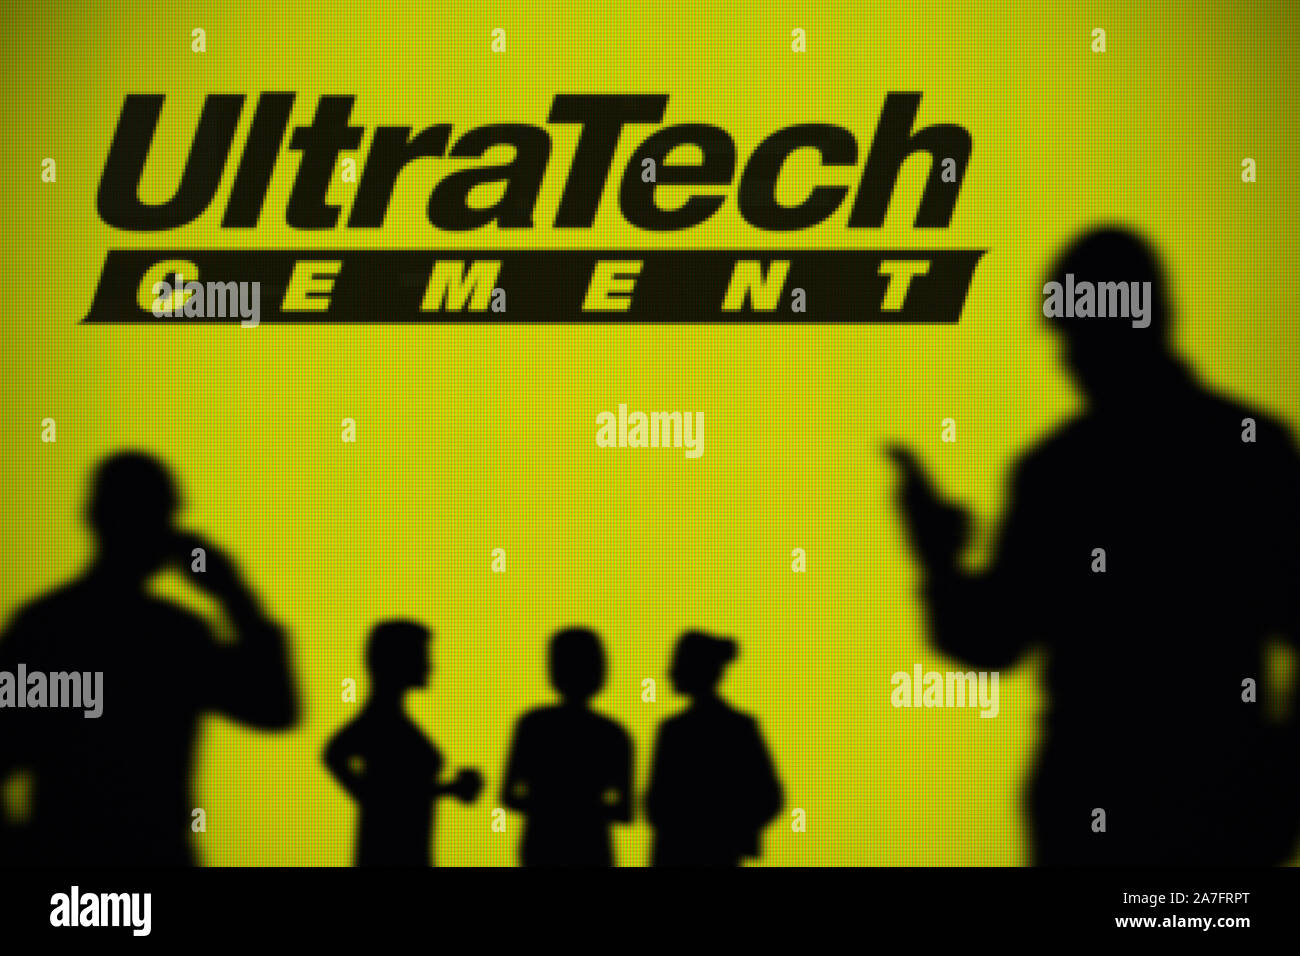 UltraTech Cement Q3 Results FY2023, Net Profit at Rs. 1058 Crores | UltraTech  Cement, Quarterly updates | 5paisa